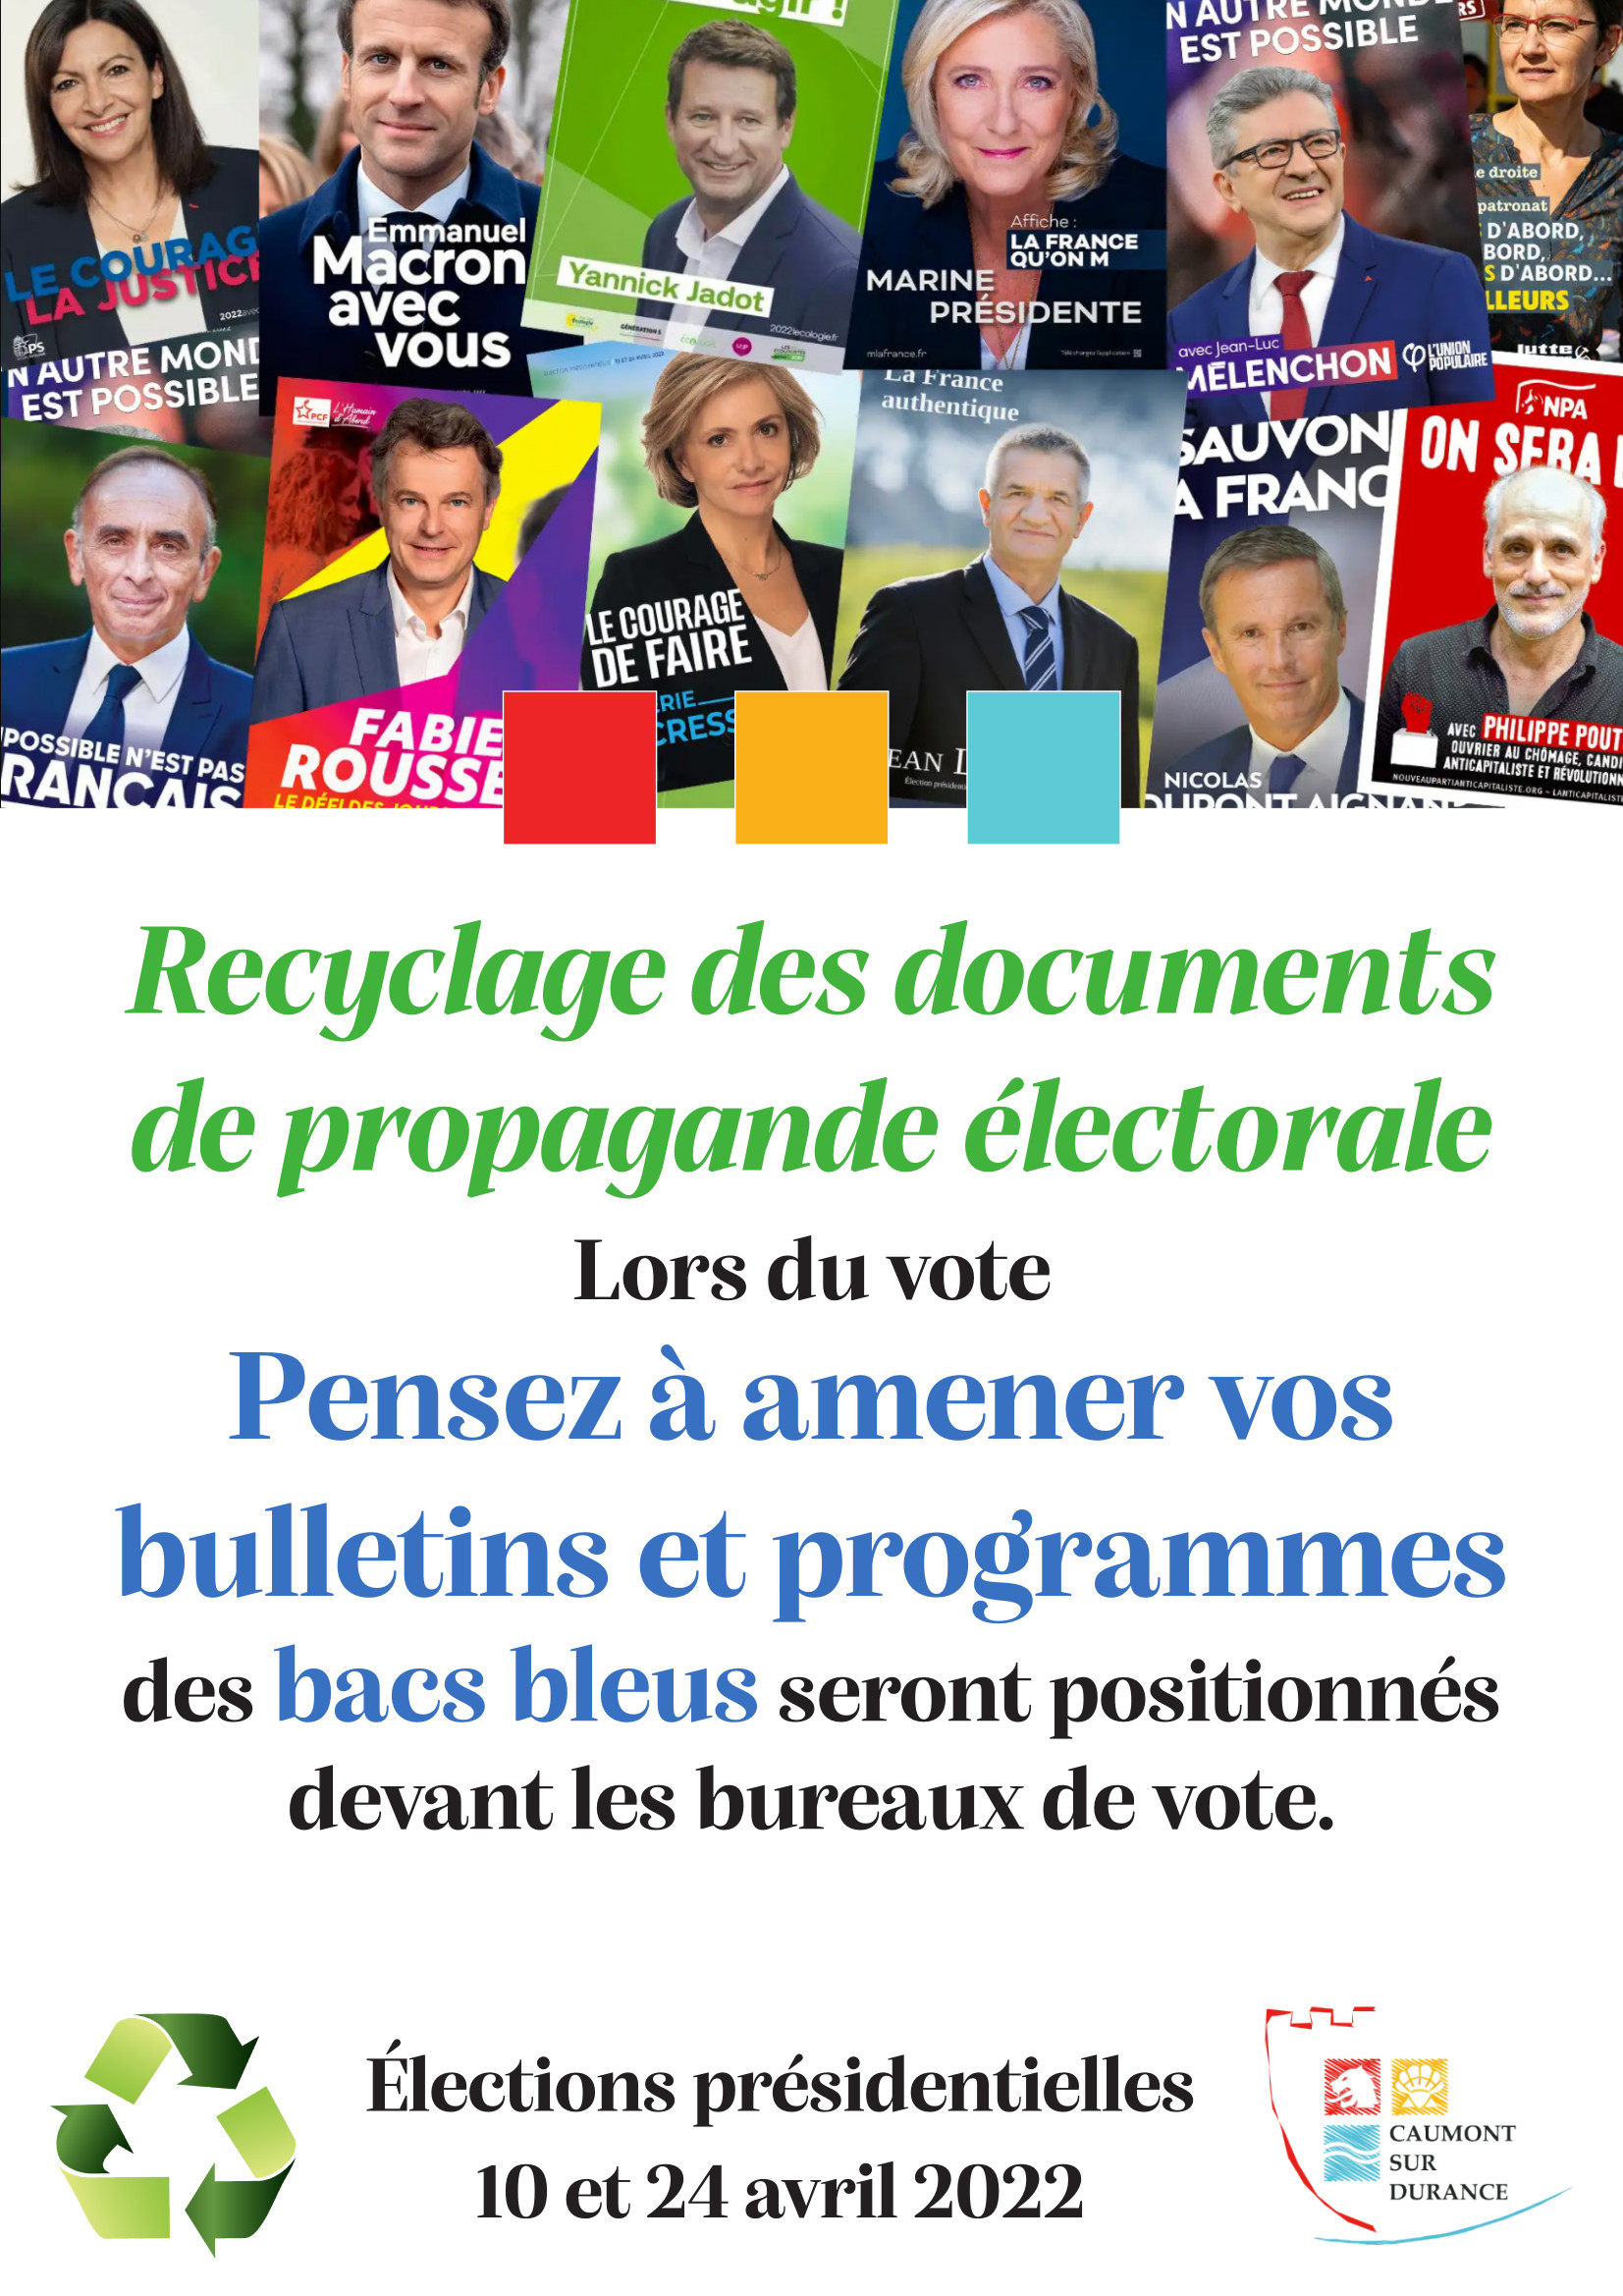 elections2022 afficherecyclage